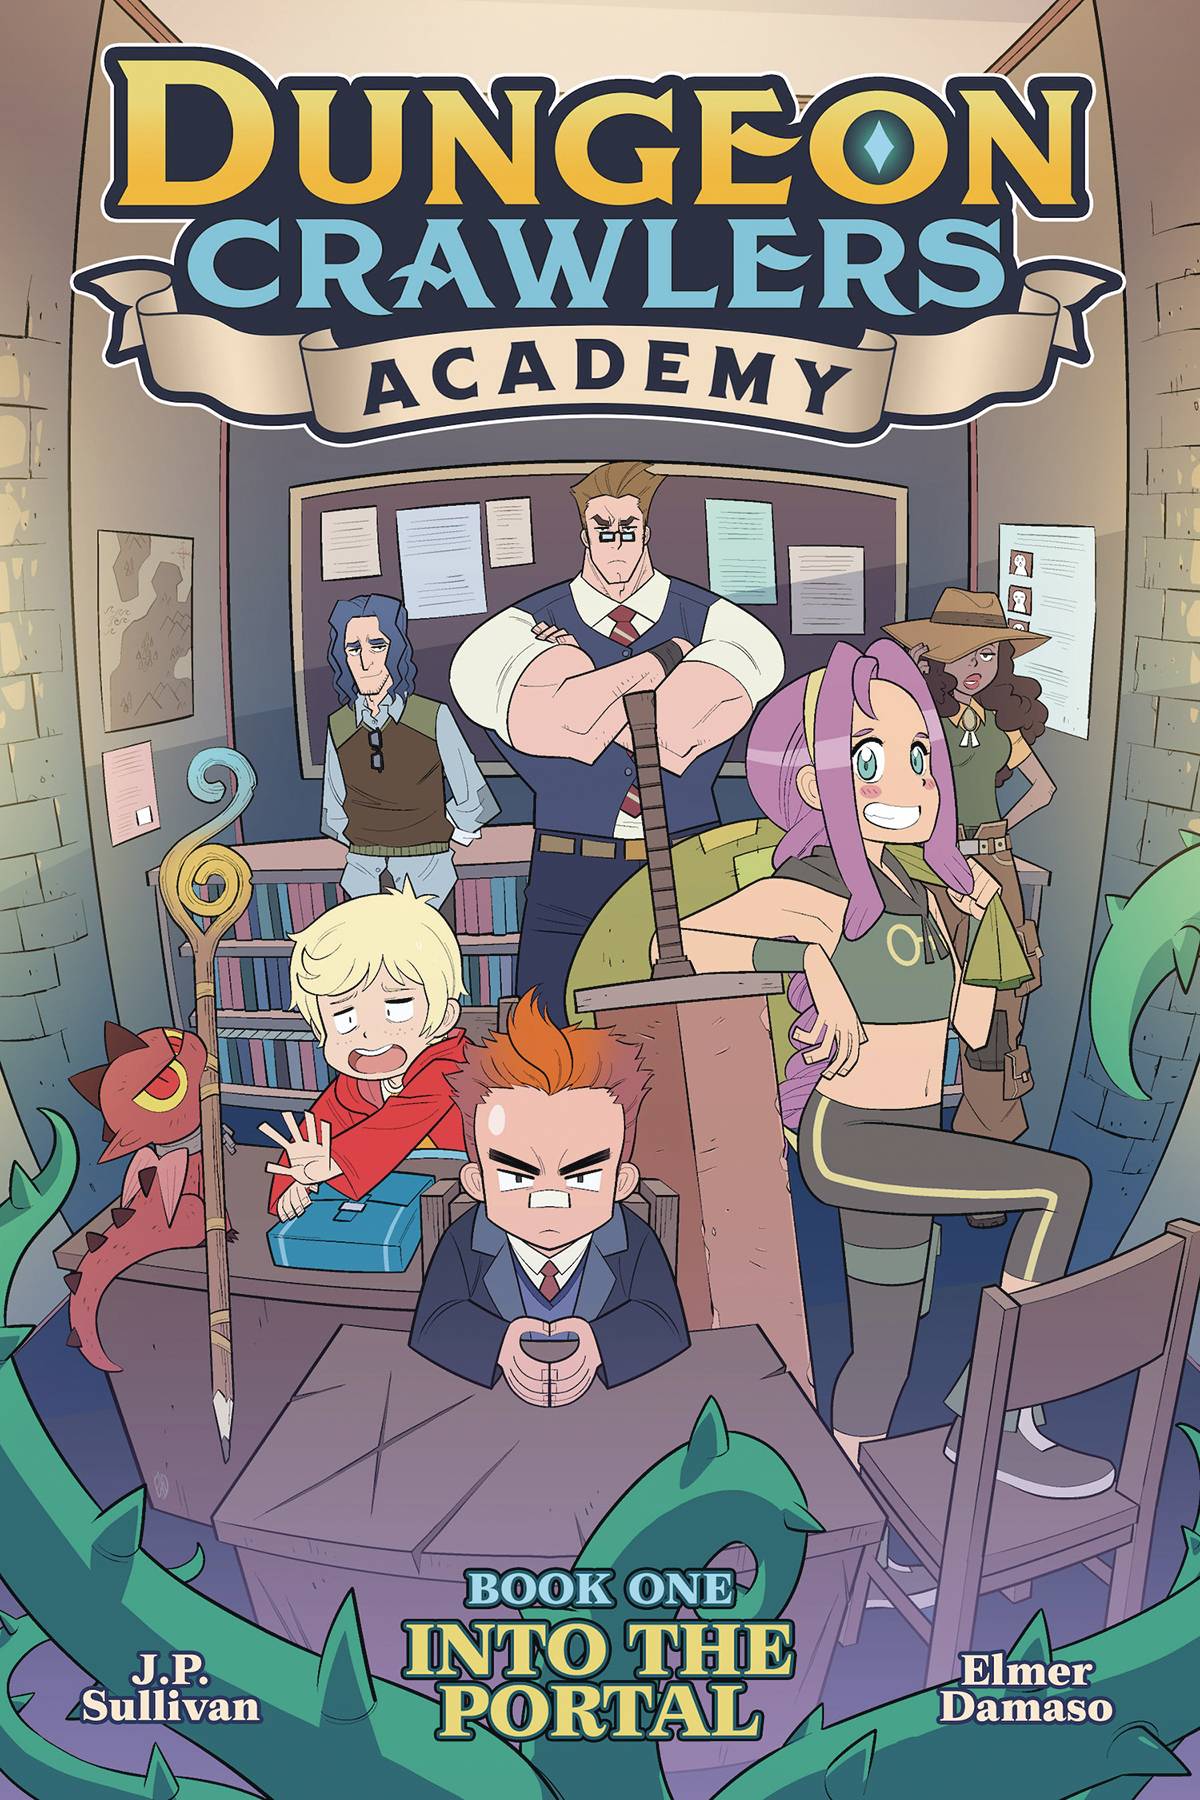 DUNGEON CRAWLERS ACADEMY GN VOL 01 INTO THE PORTAL (MR)